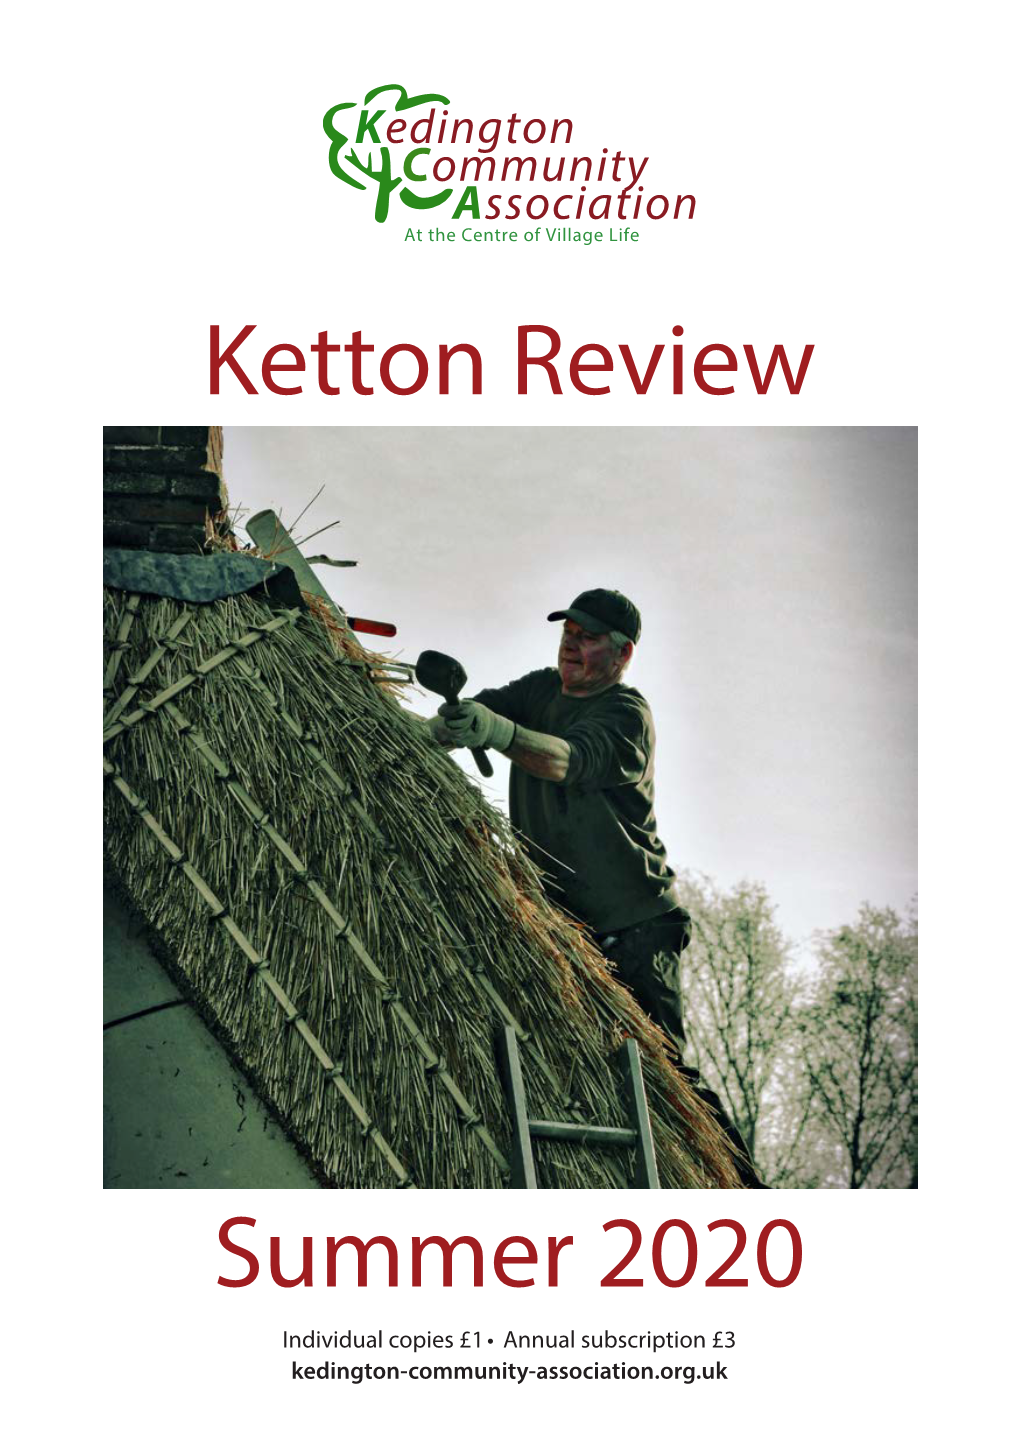 Ketton Review Summer 2020 3 Village Groups and Organisations